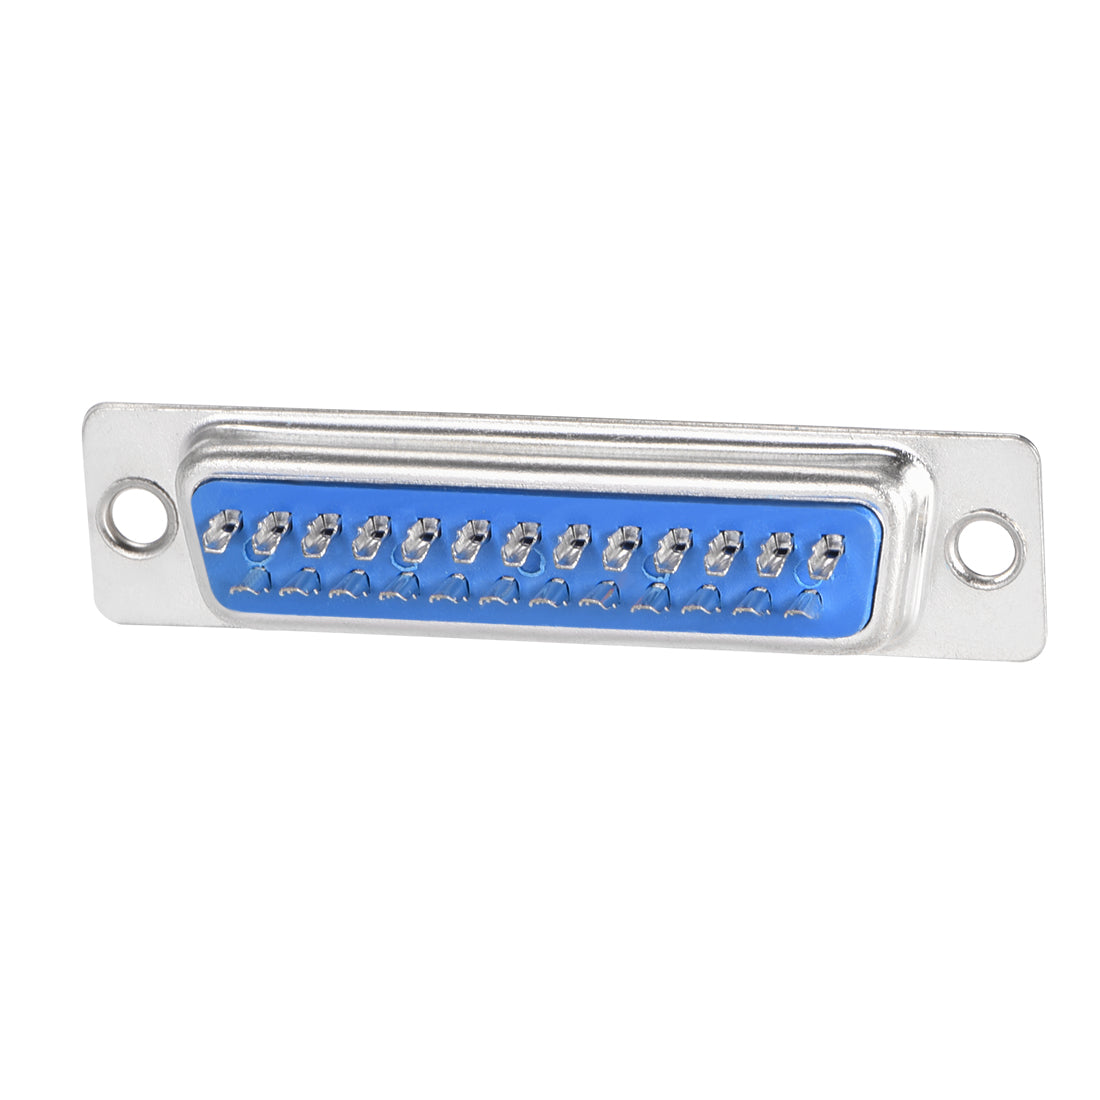 uxcell Uxcell D-sub Connector Male Plug 25-pin 2-row Port Terminal Breakout Solder Type for Mechanical Equipment CNC Computers Blue 1pc